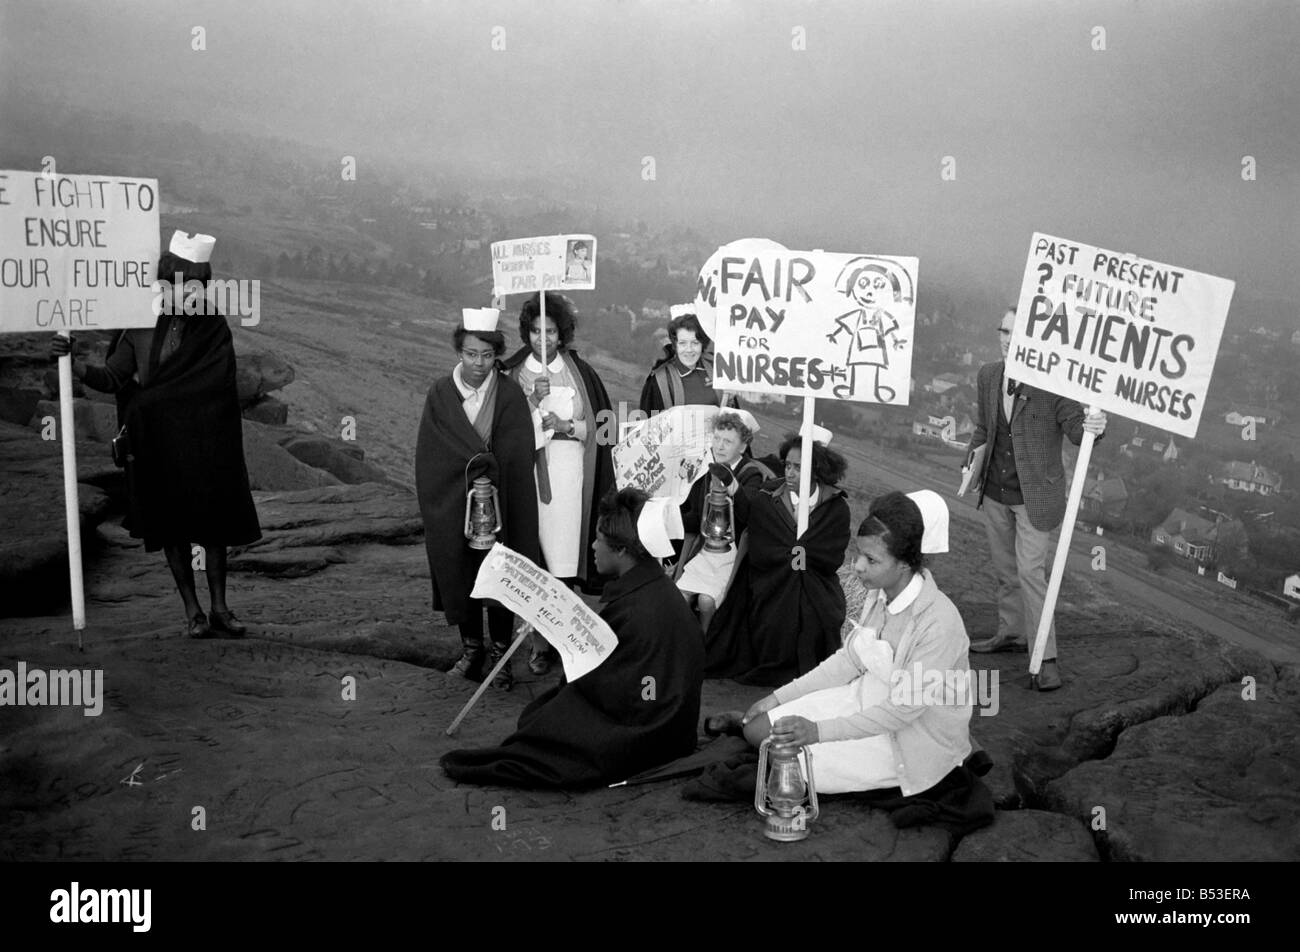 Nurses campaigned for more pay near Ilkley when they marched from the town centre to the Cow & Calf Rocks high on the Ilkley moors where they intend to camp. Pictures show the nurses on their way to the Cow and Calf Rocks;December 1969 ;Z11650-002 Stock Photo